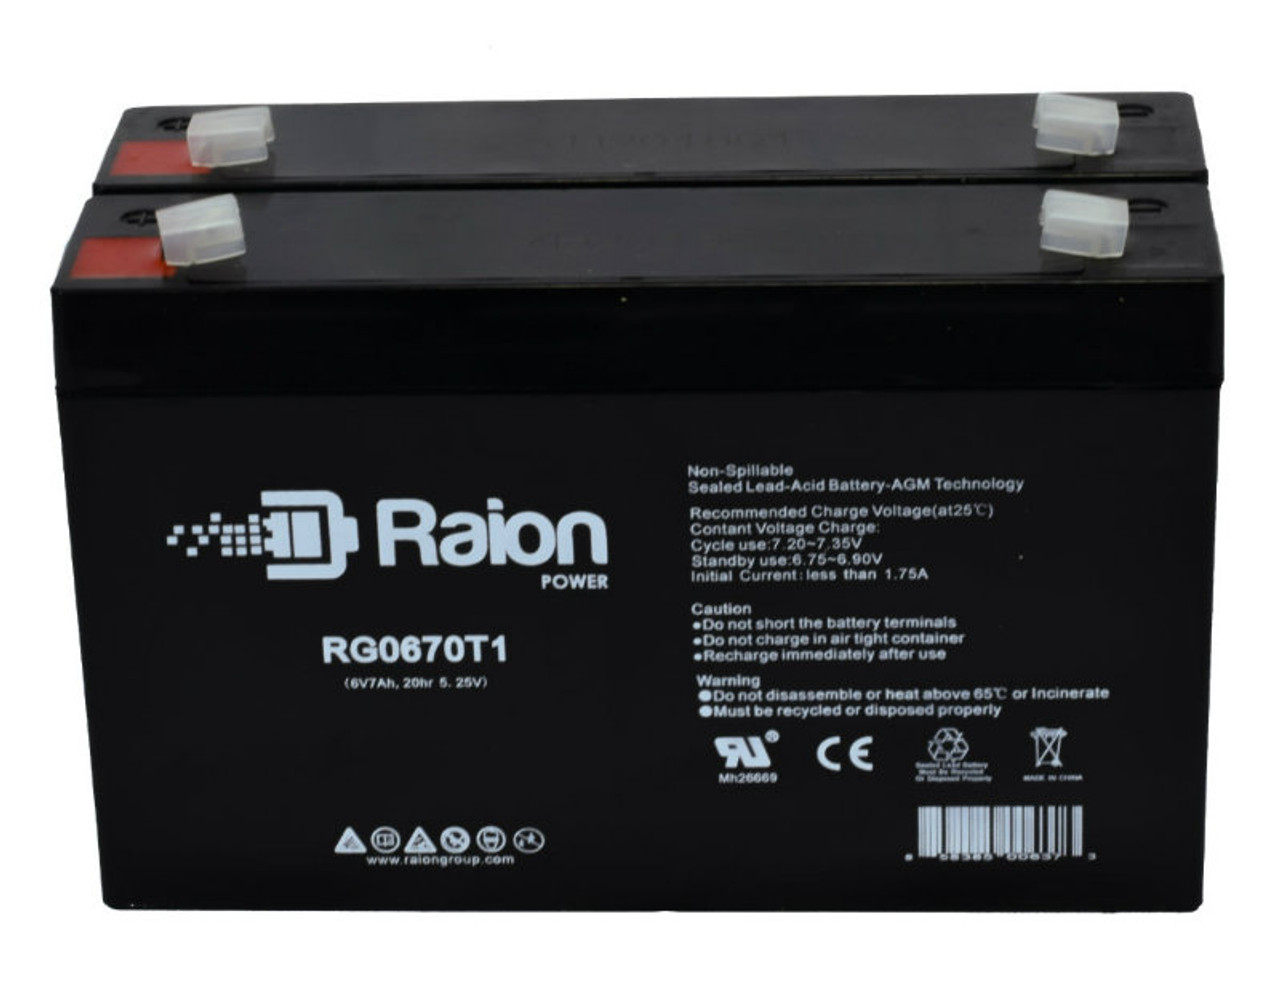 Raion Power RG0670T1 6V 7Ah Replacement Emergency Light Battery for Portalac GS PE6V7.2F1 - 2 Pack